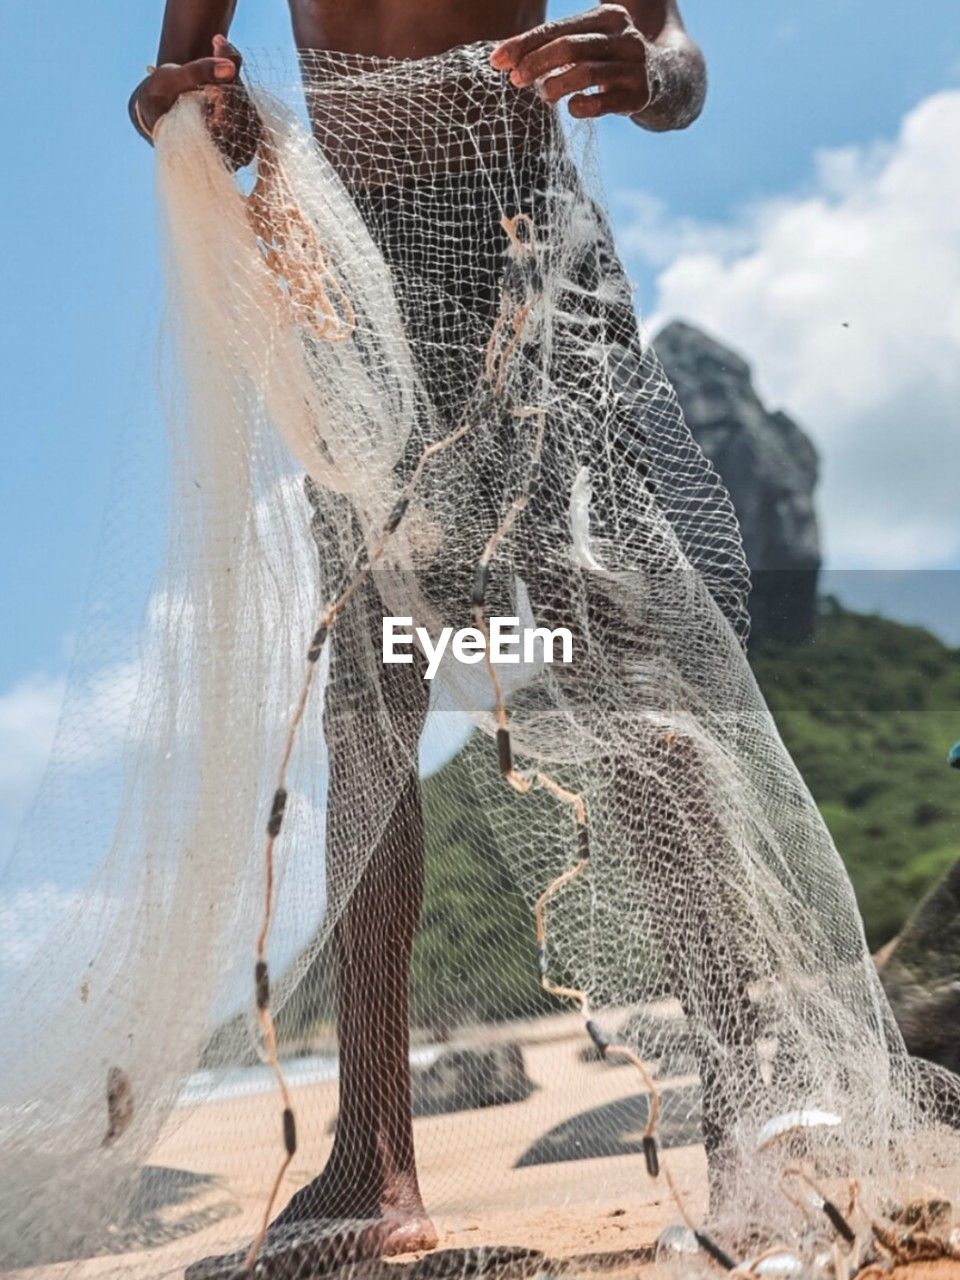 nature, sky, adult, fishing net, spring, one person, dress, wedding dress, cloud, women, day, standing, clothing, land, netting, commercial fishing net, bride, sunlight, outdoors, fishing industry, water, fishing, activity, beach, person, holding, fashion